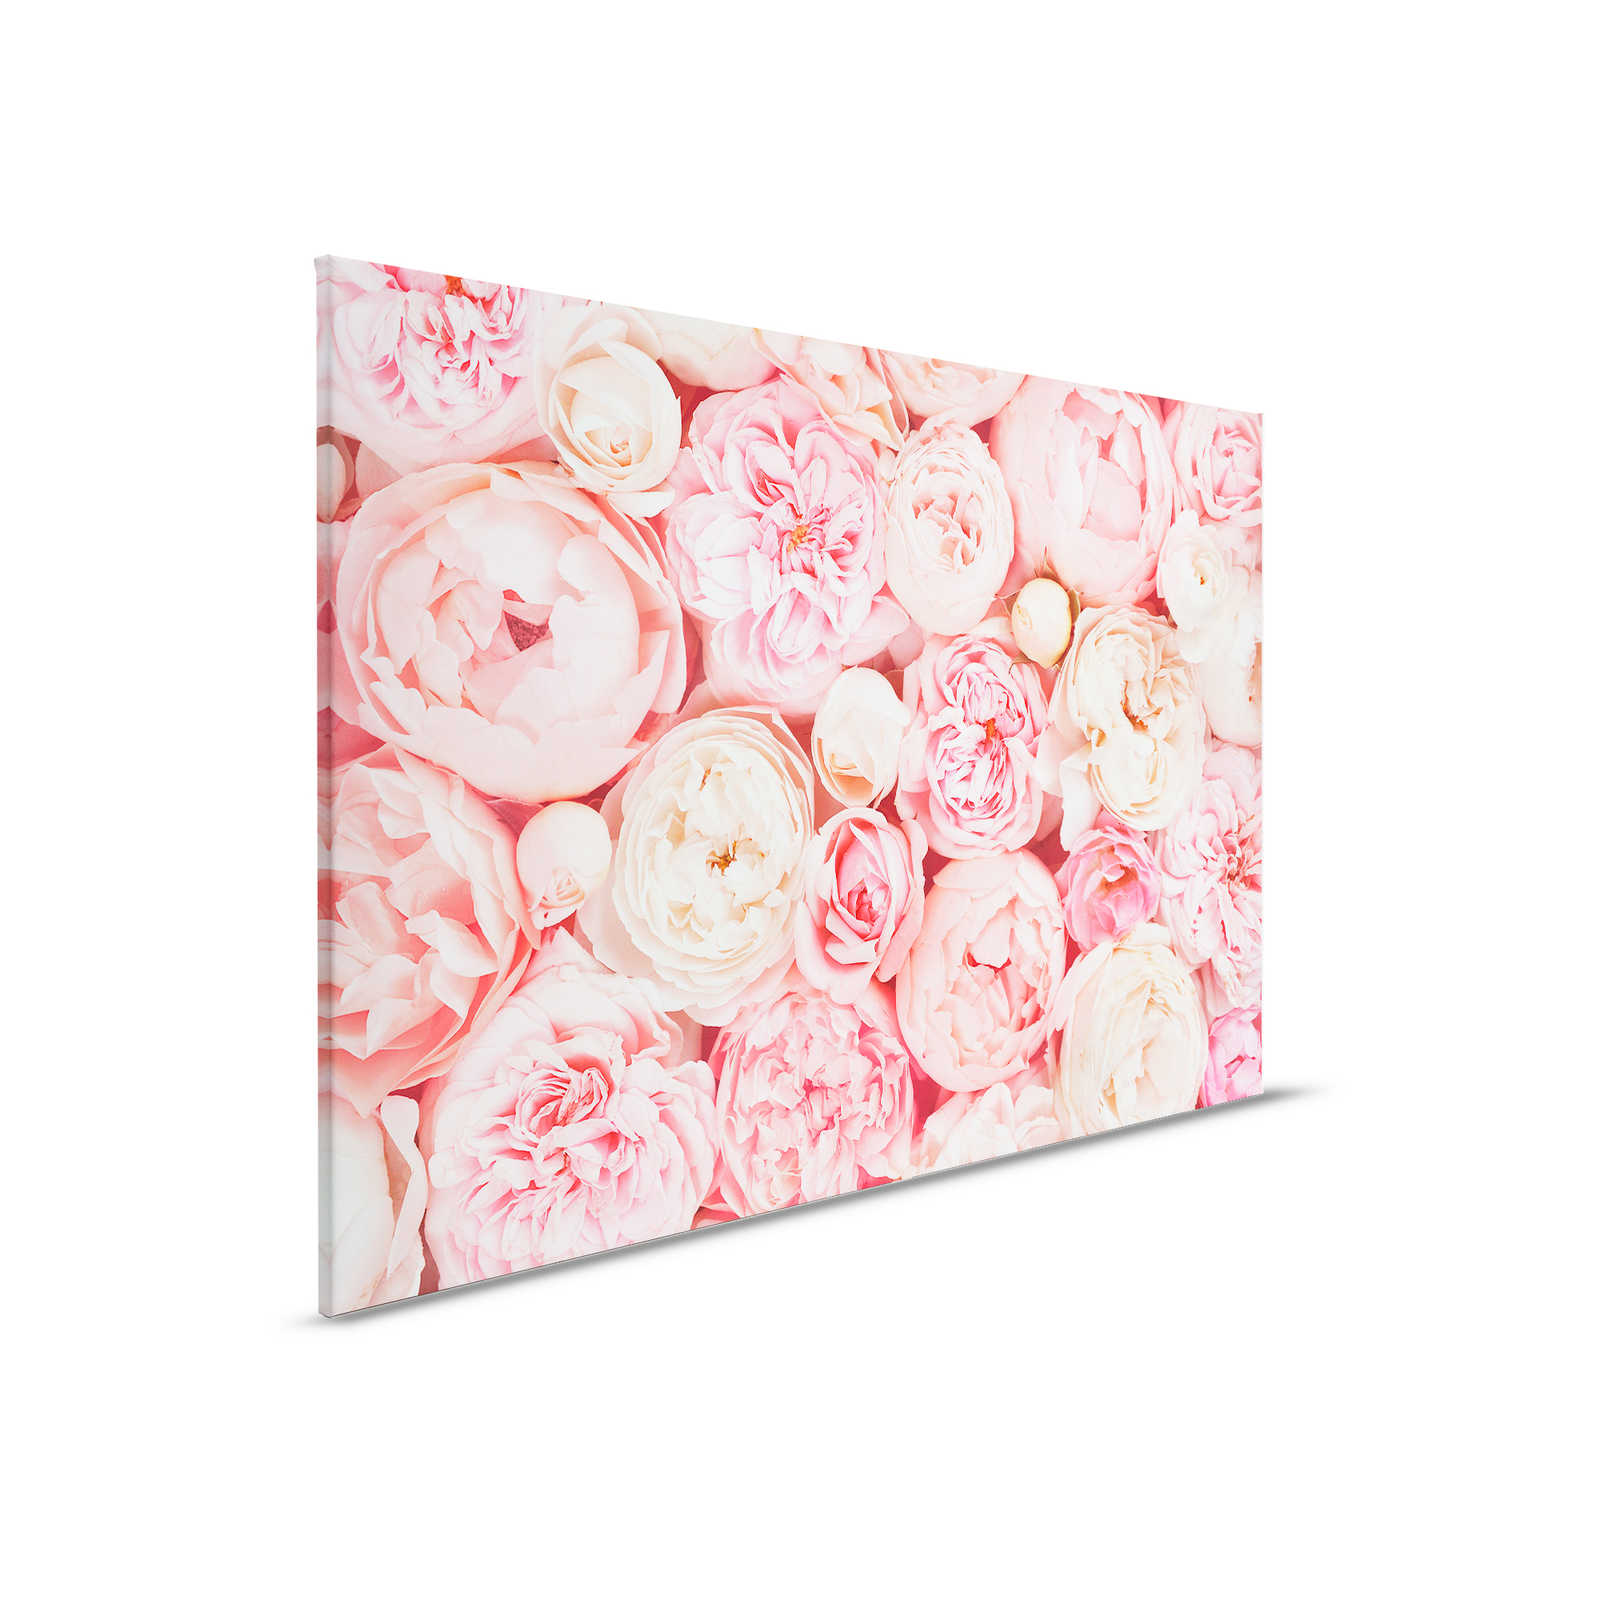         Canvas with roses motif - 0.90 m x 0.60 m
    